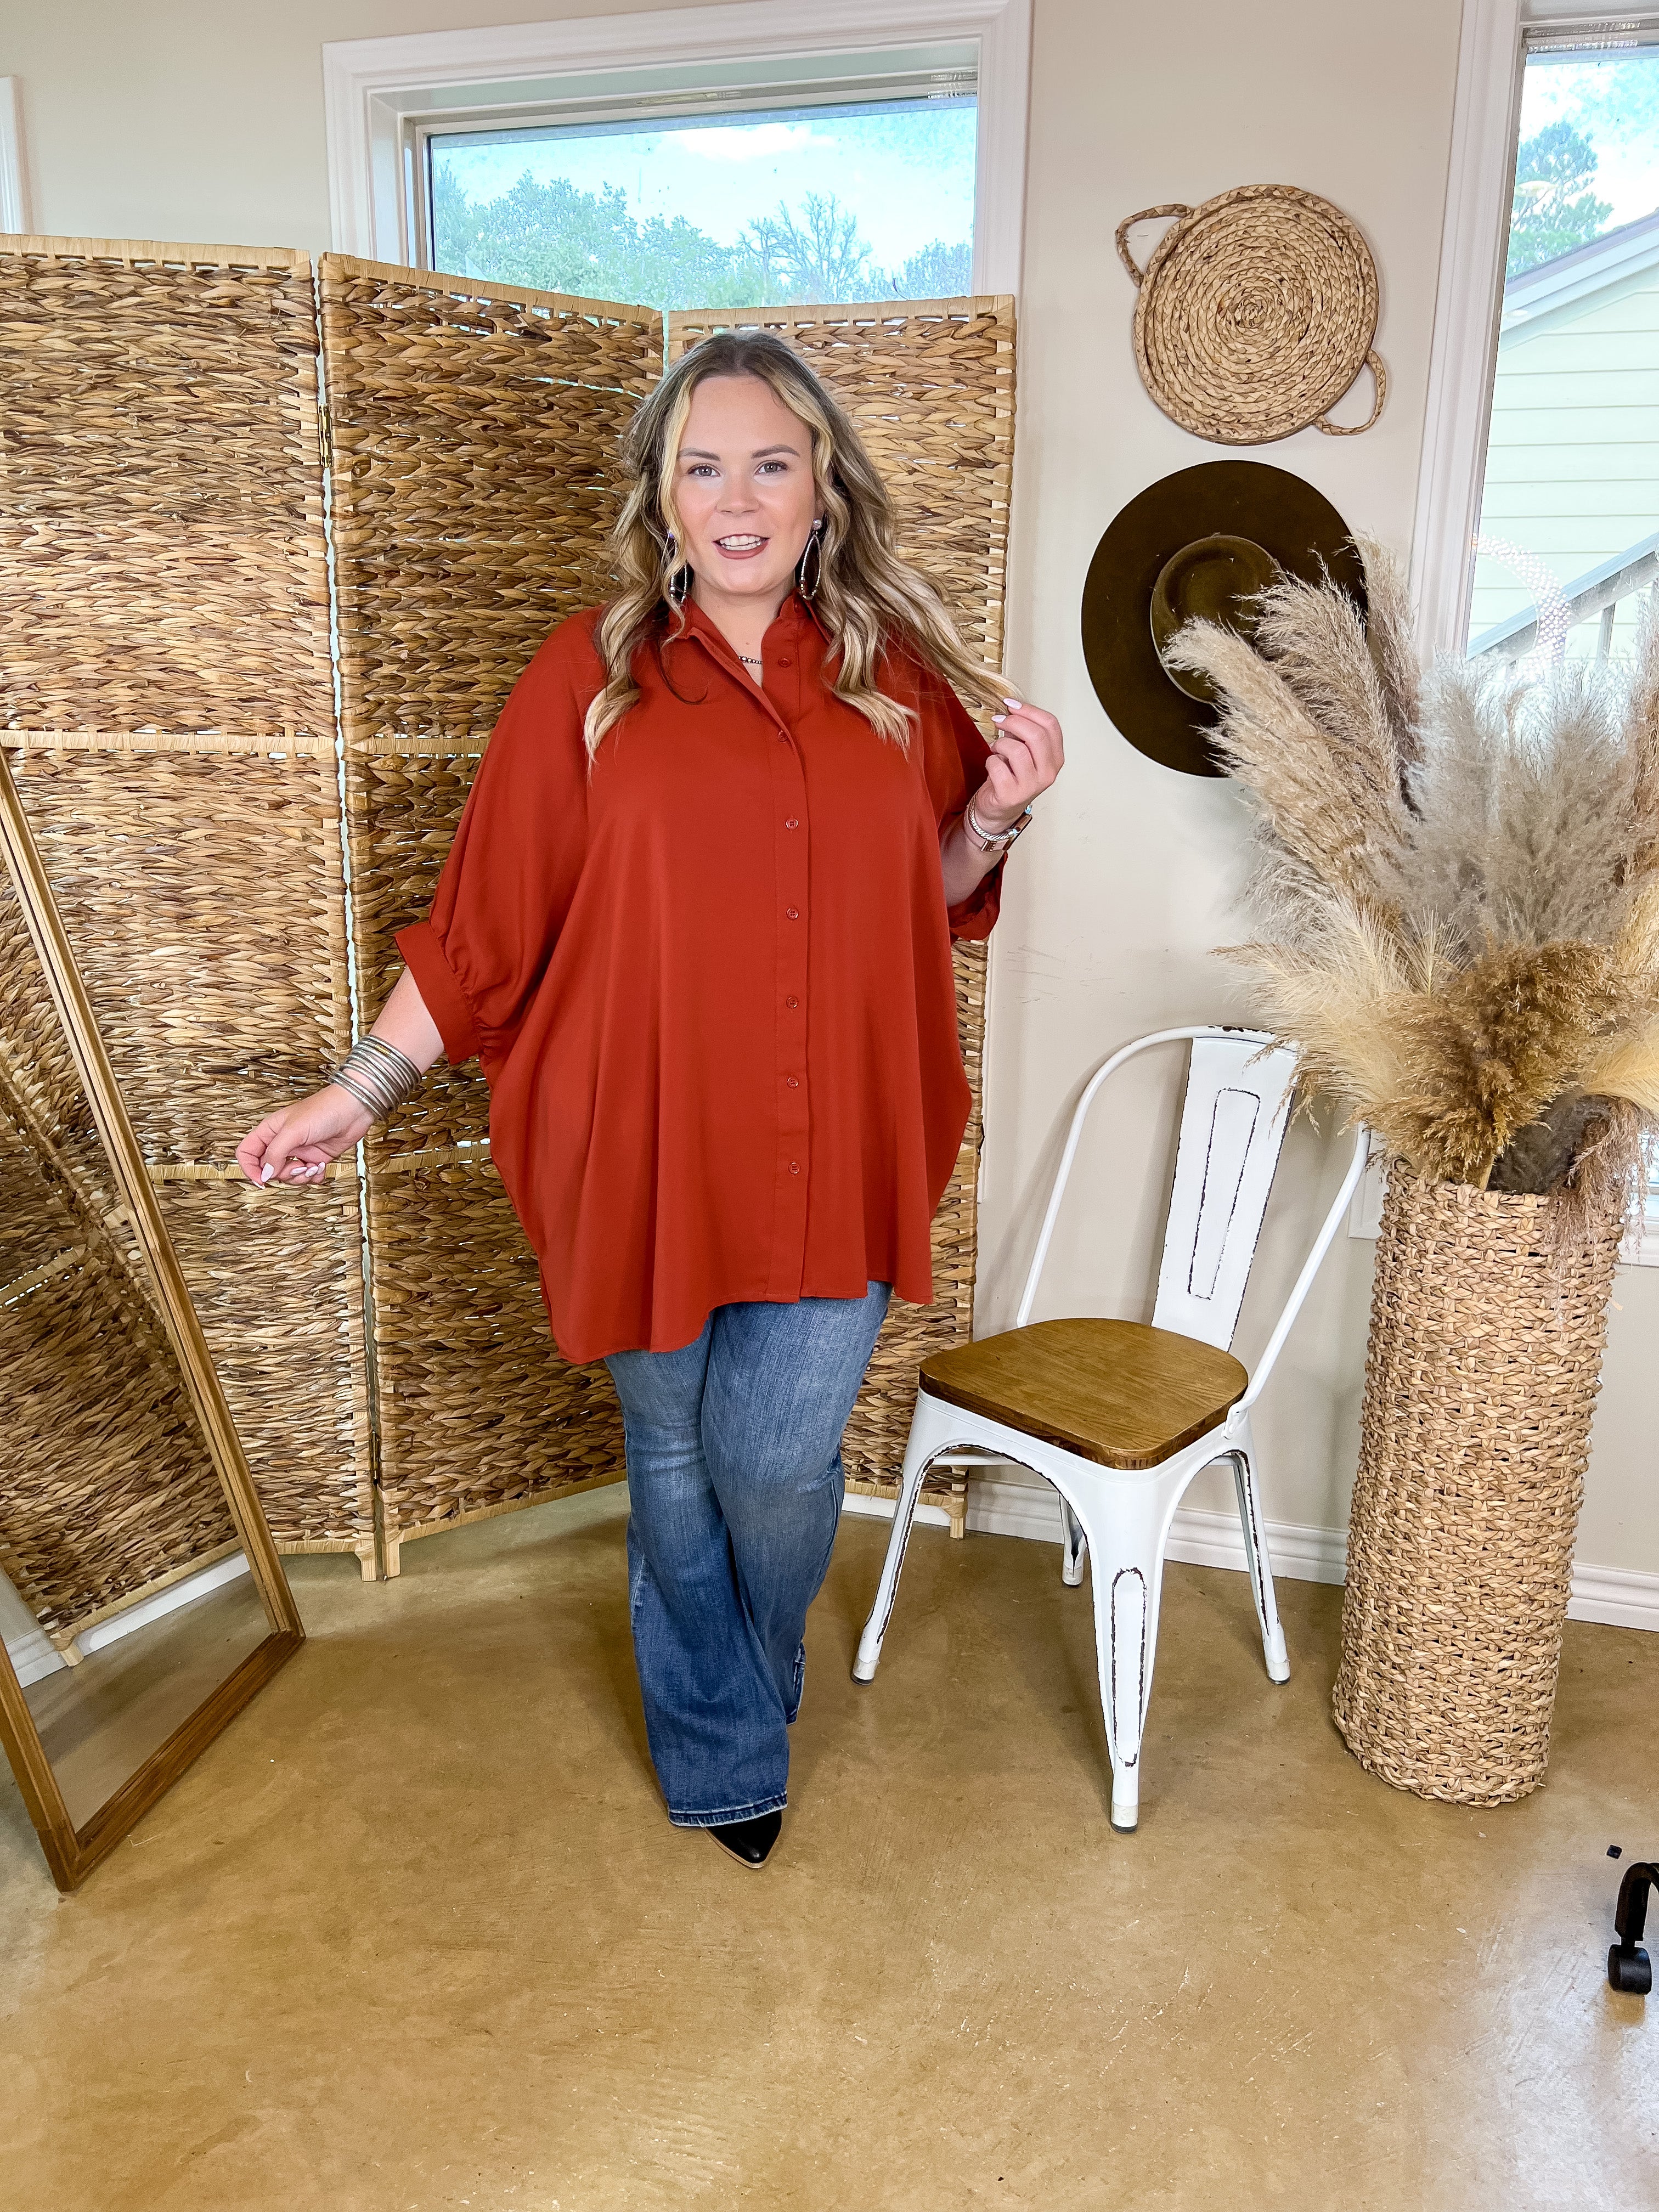 City Lifestyle Button Up Half Sleeve Poncho Top in Rust Orange - Giddy Up Glamour Boutique